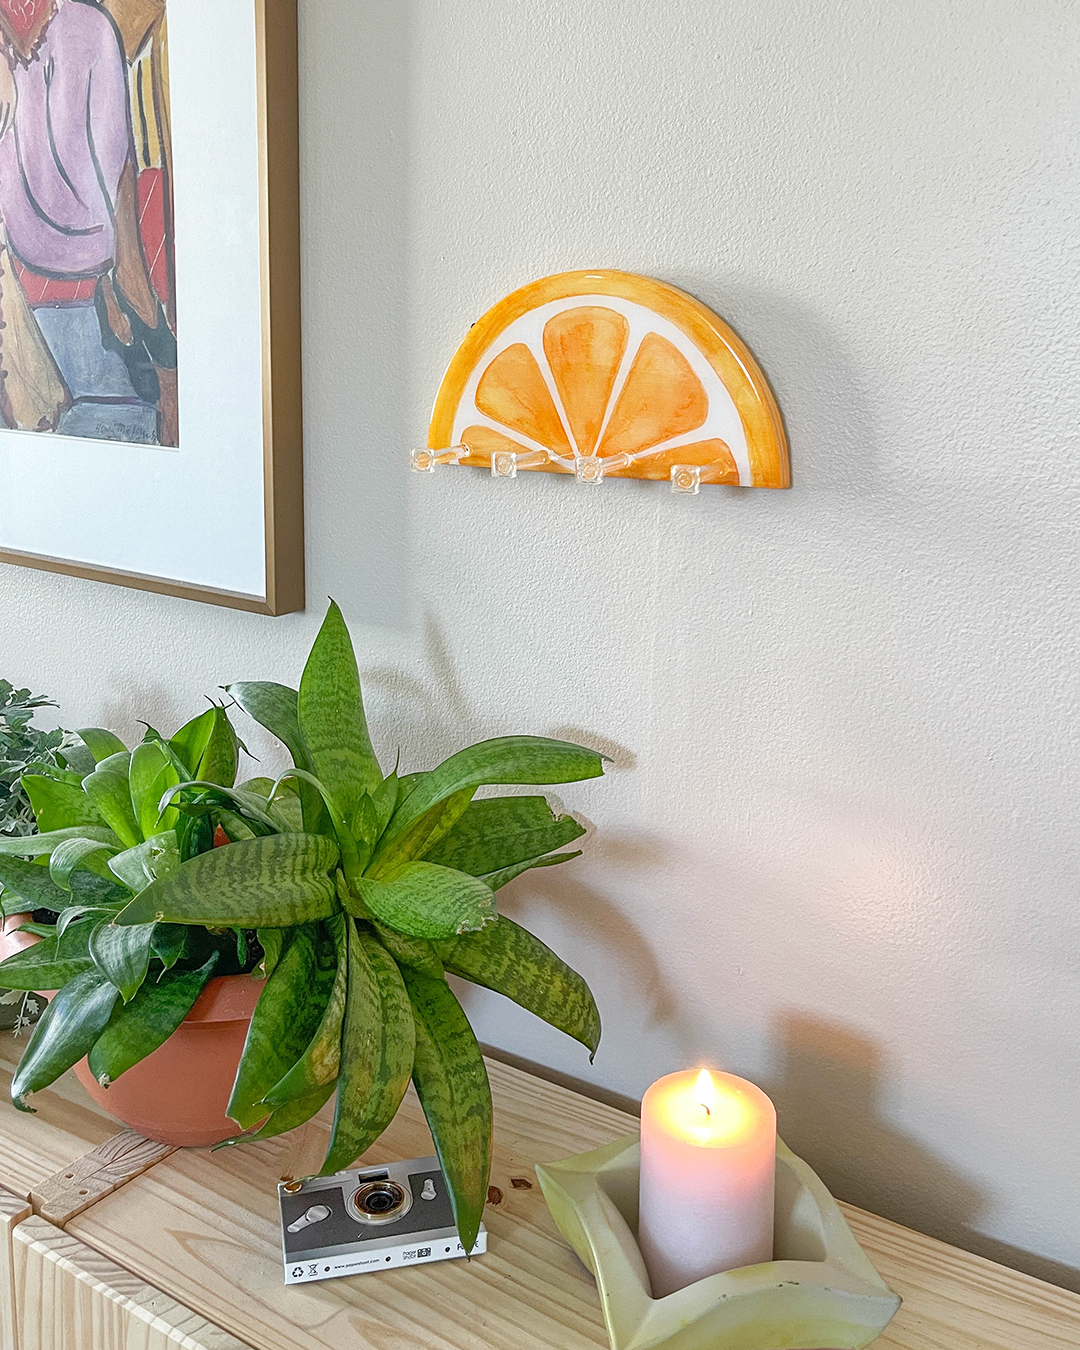 Decorative and practical orange design key holder, blending art with utility for wall organization